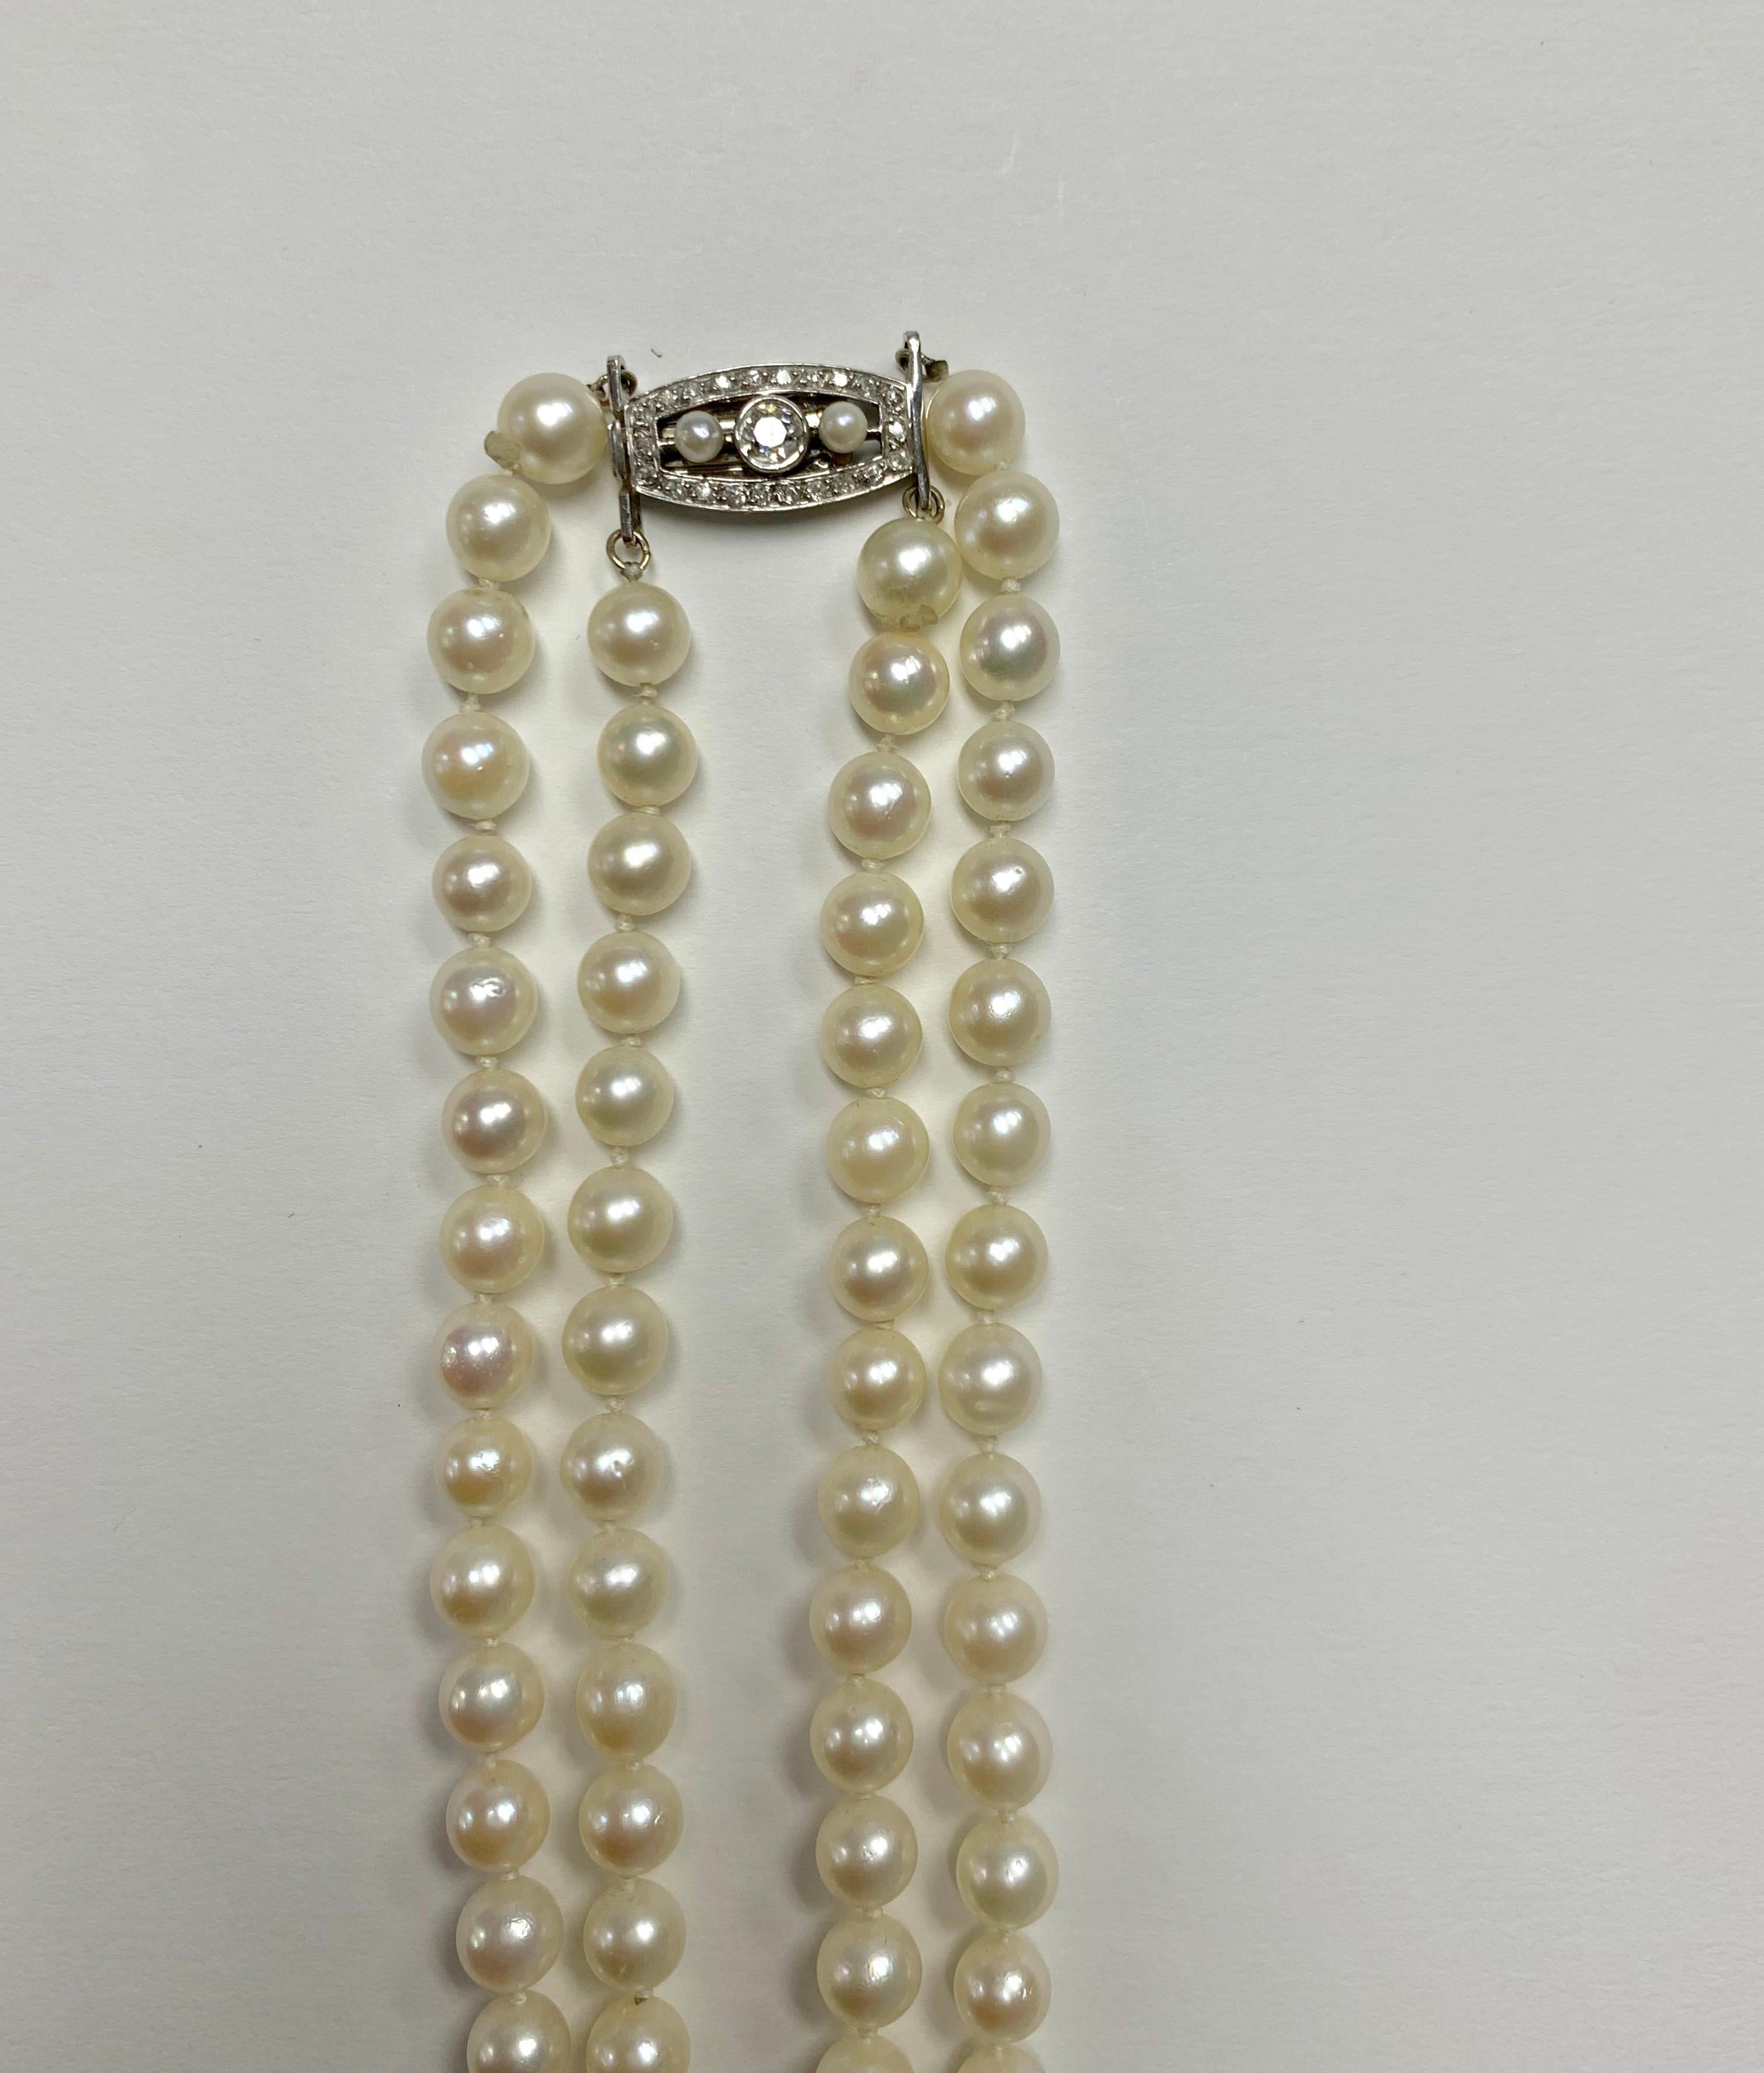 1920 long pearl necklace